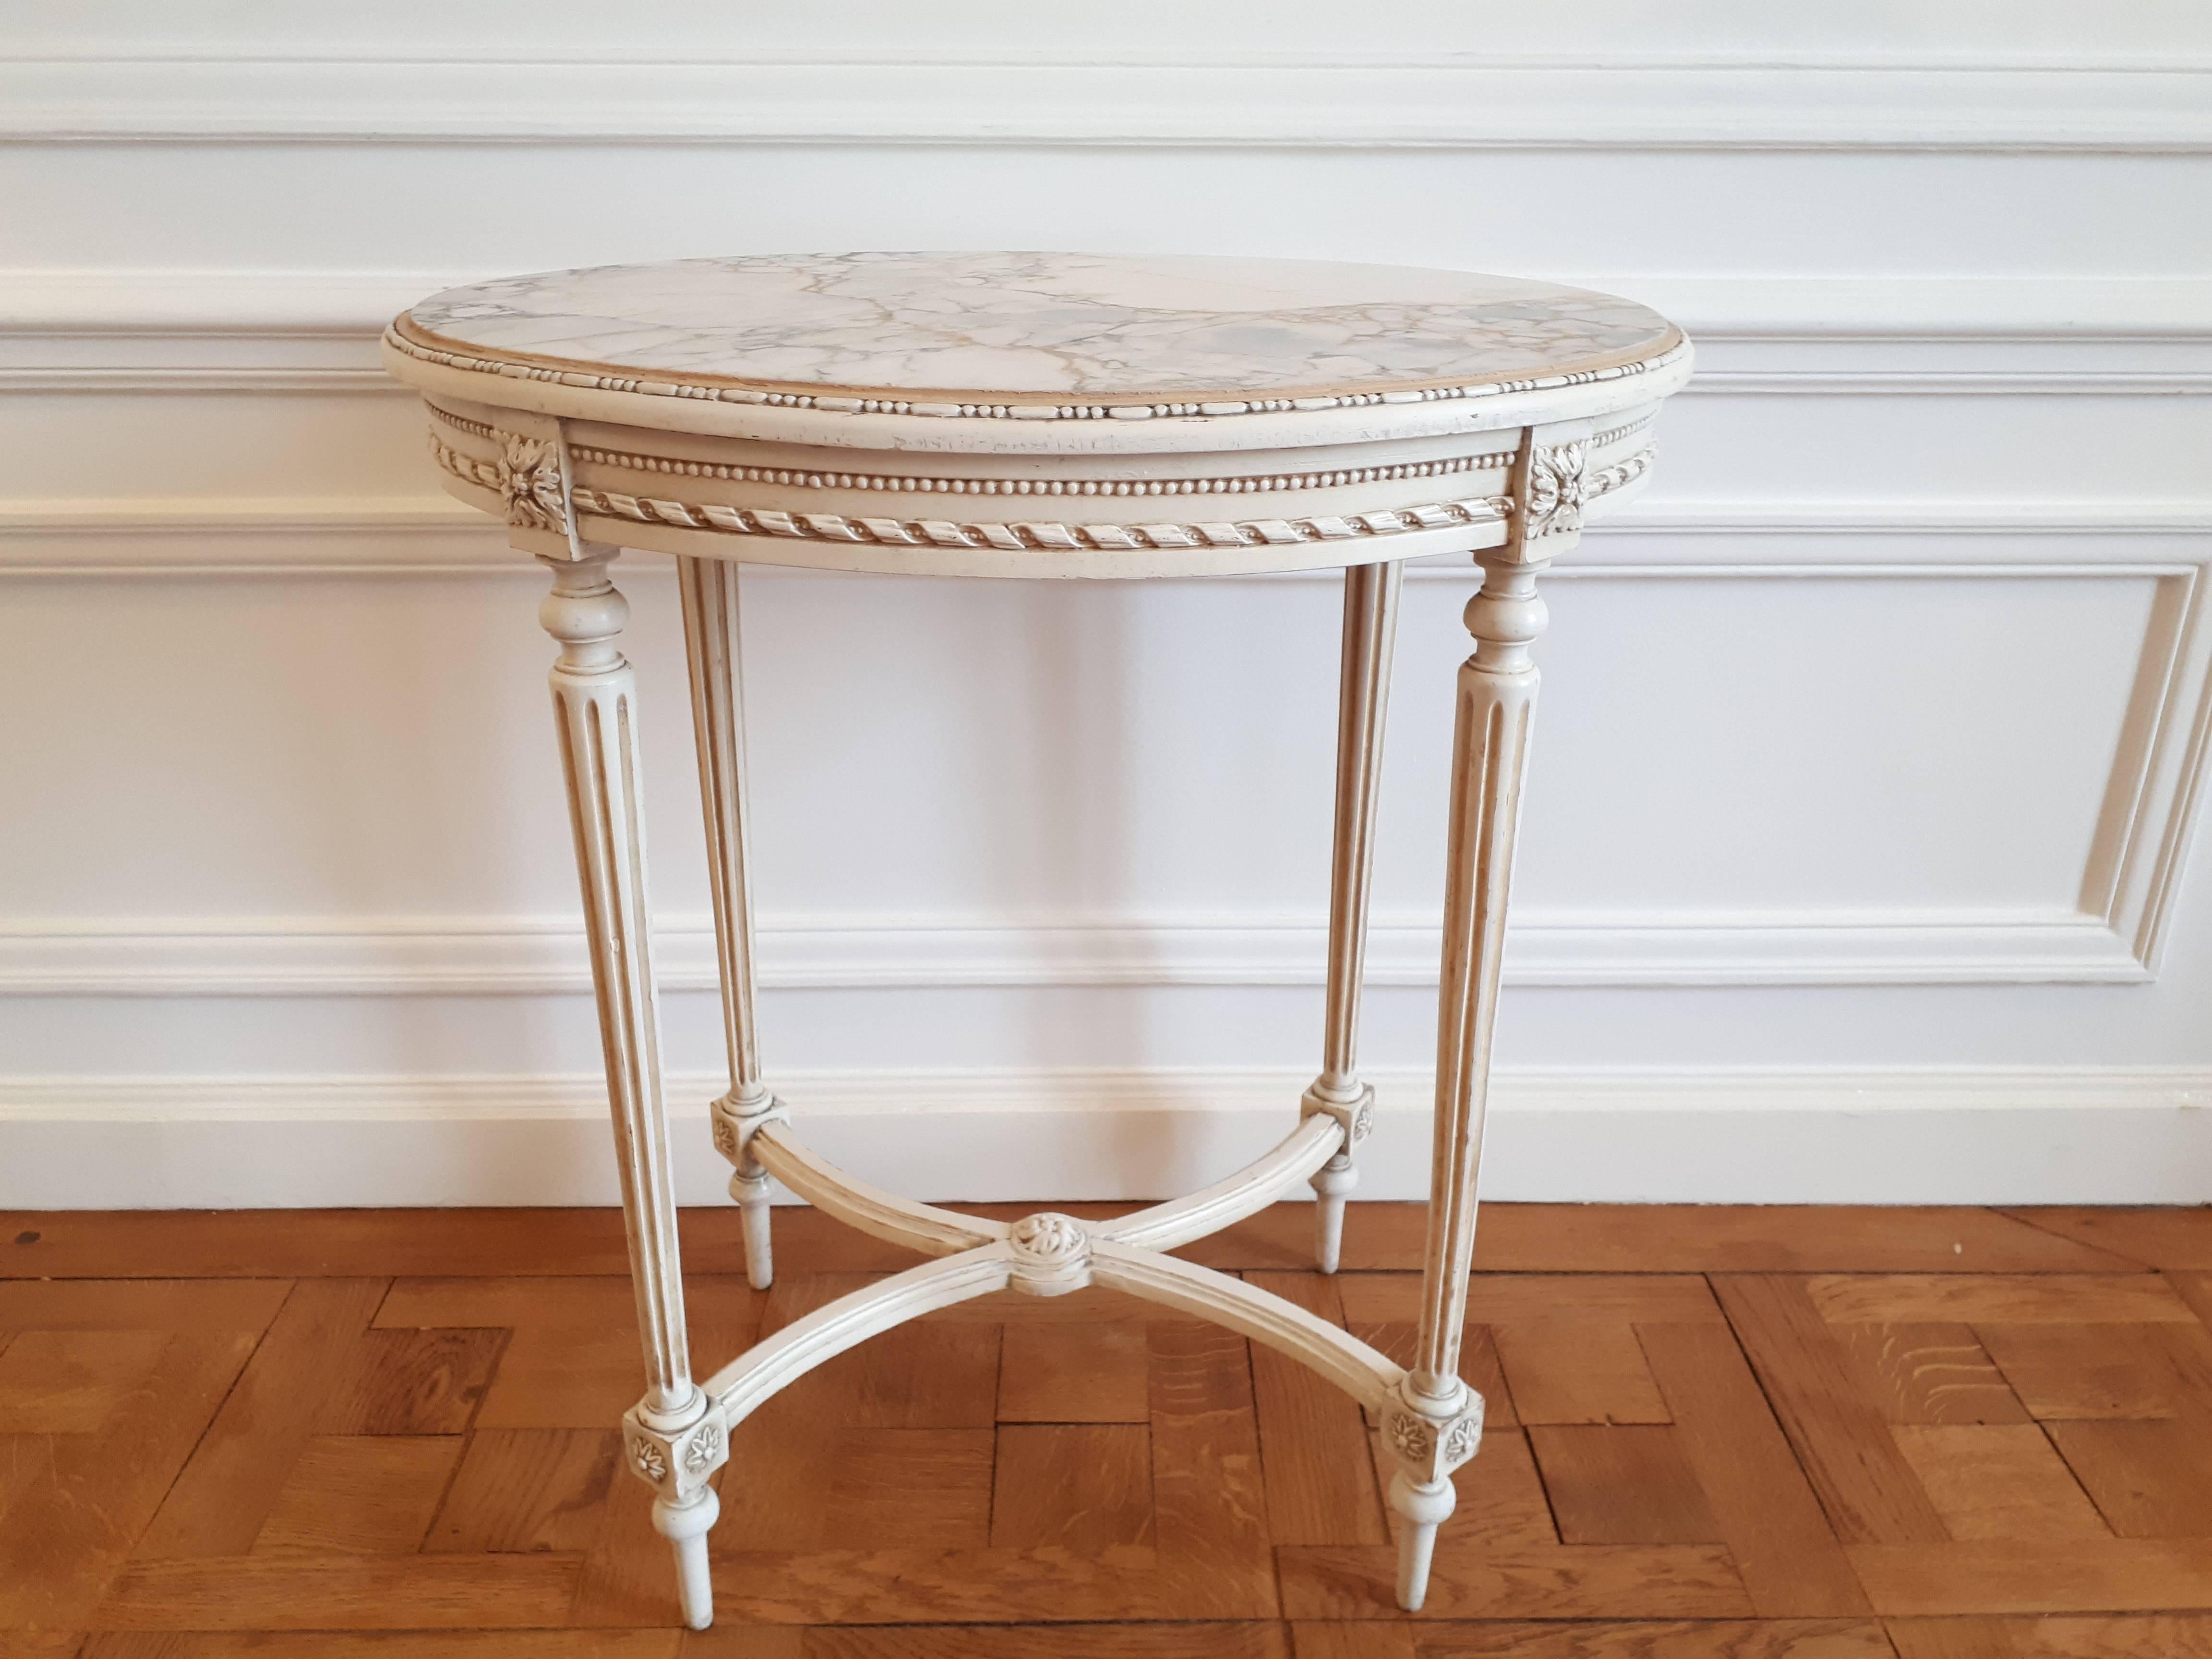 Antique French Louis XVI style gueridon with a wooden structure and a superb onyx top. Fluted legs finished with simple but elegant arches to join the feet with a flower in the centre.
We find in the woodwork all the characteristic elements of the